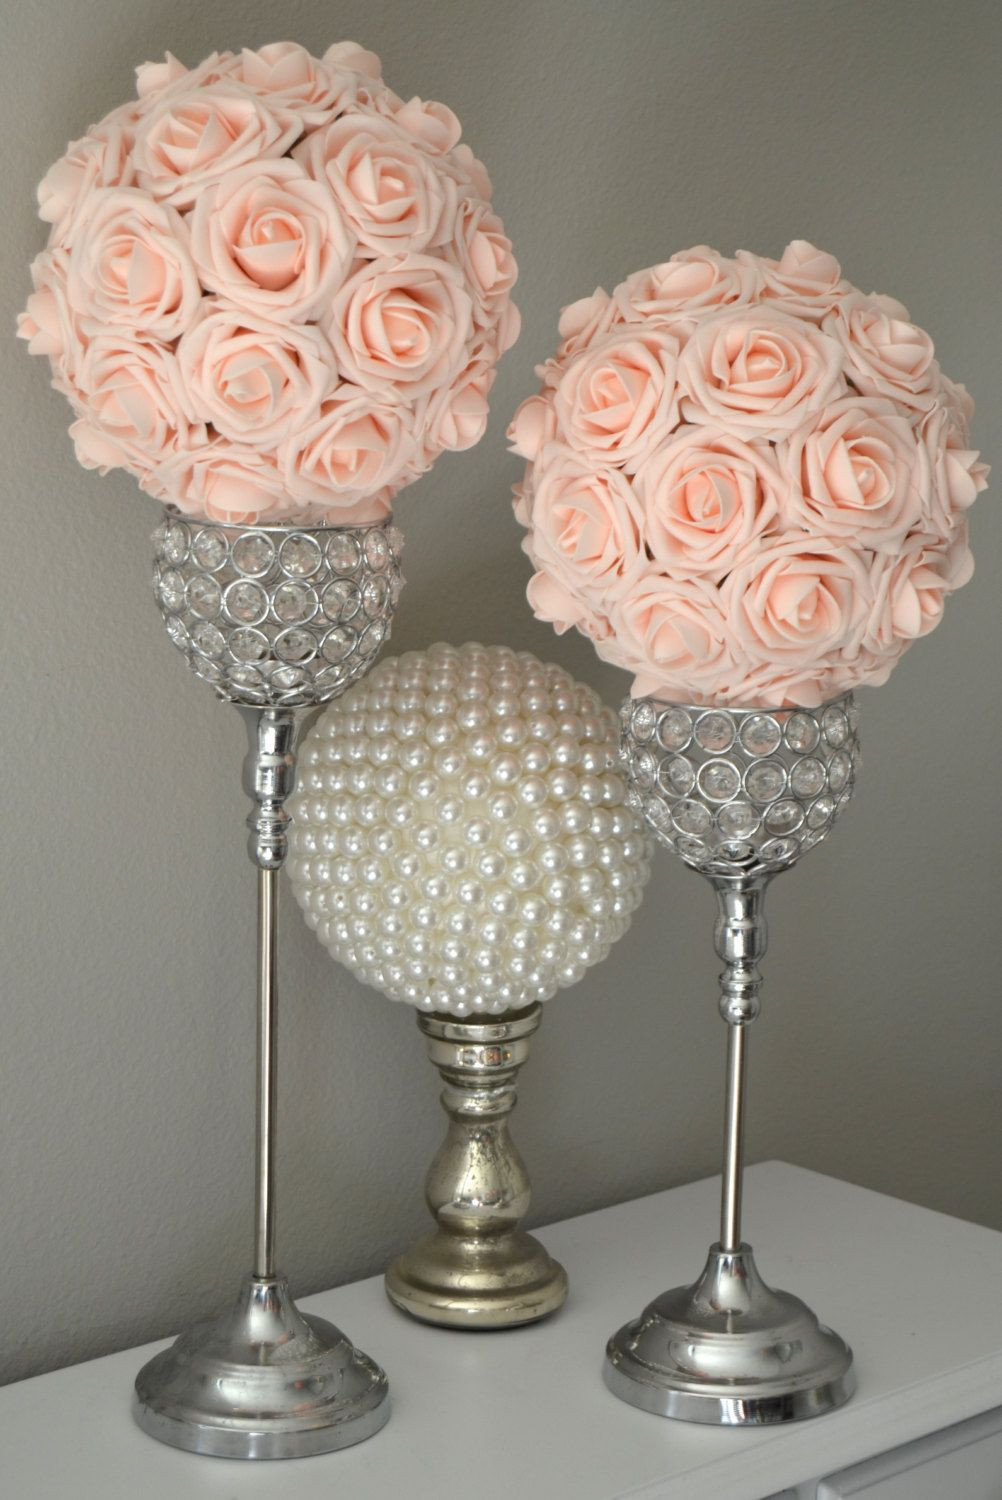 25 Awesome Diy Wedding Vase Centerpieces 2024 free download diy wedding vase centerpieces of decorative balls for centerpieces images tallh vases glitter vase for decorative balls for centerpieces pictures pink blush kissing ball wedding centerpiece 